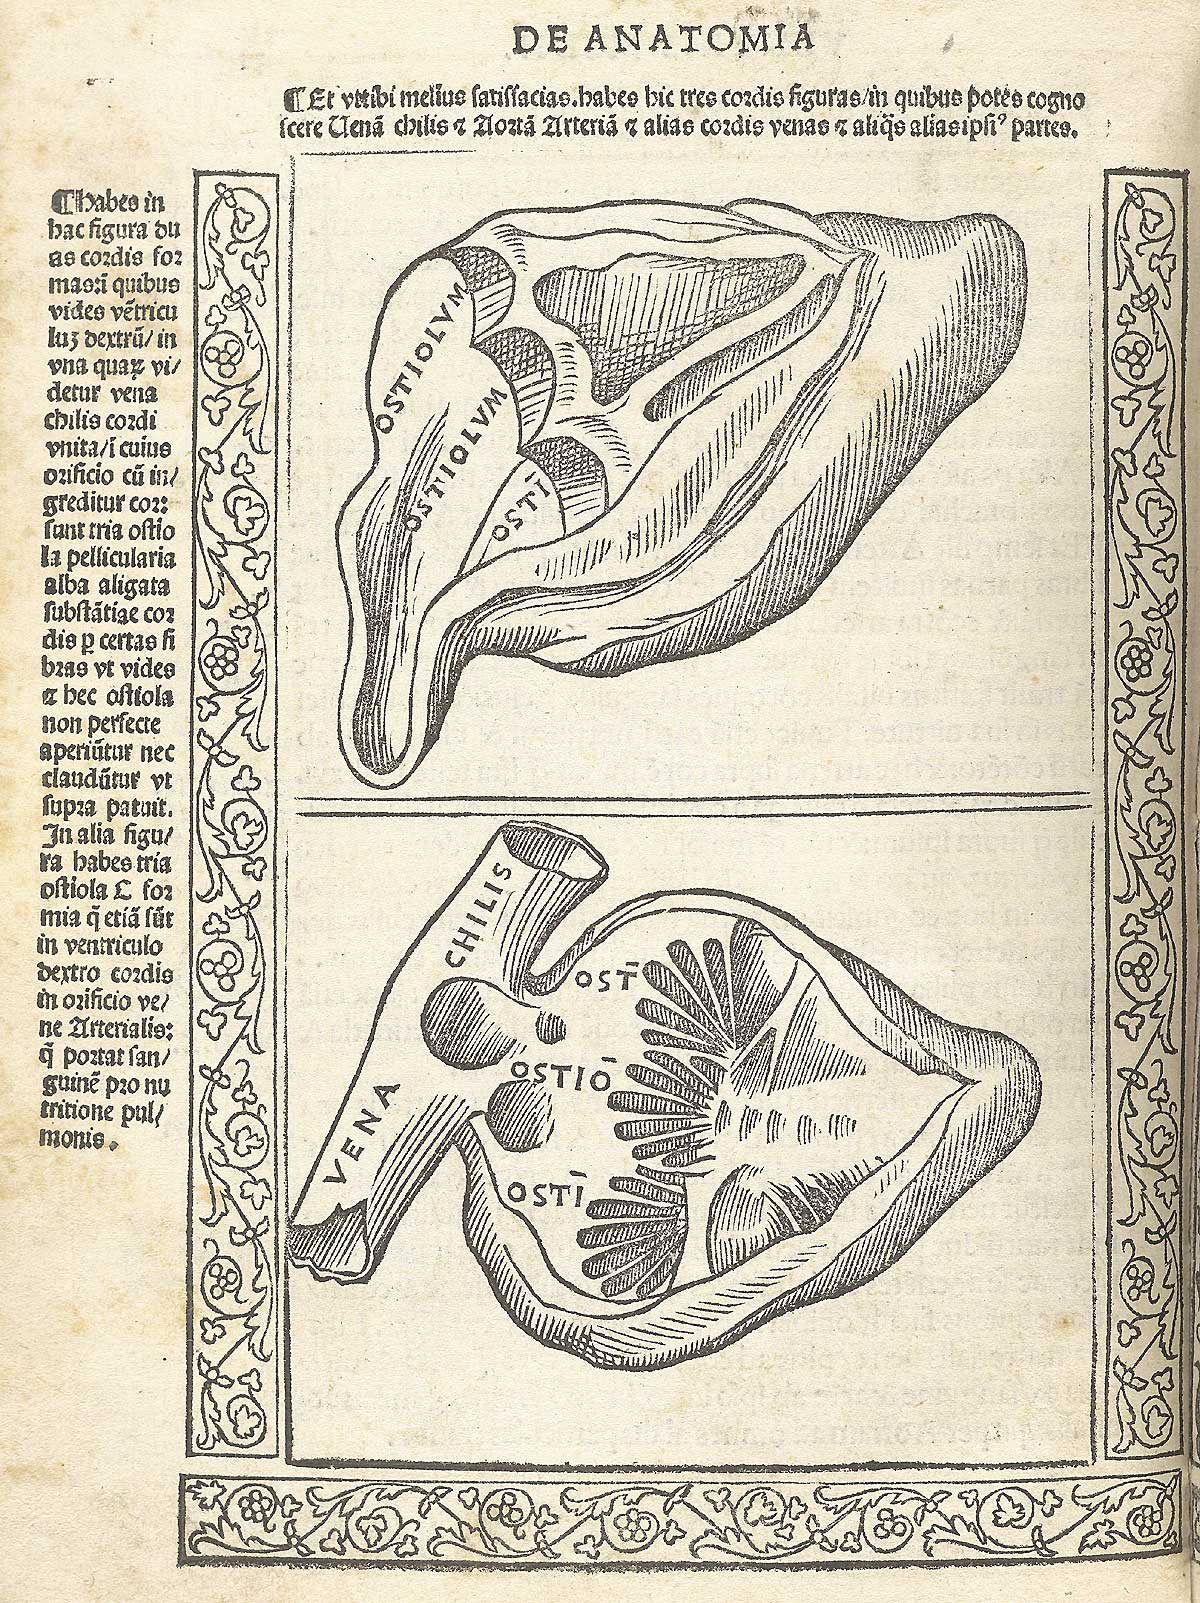 Two woodcuts of the heart (one above the other) in cross section showing the ventricles and large veins entering the organ; with a woodcut border and text in Latin on the left side of page, from Berengario da Carpi’s Isagogae breues, Bologna, 1523, NLM Call no. WZ 240 B488i 1523.